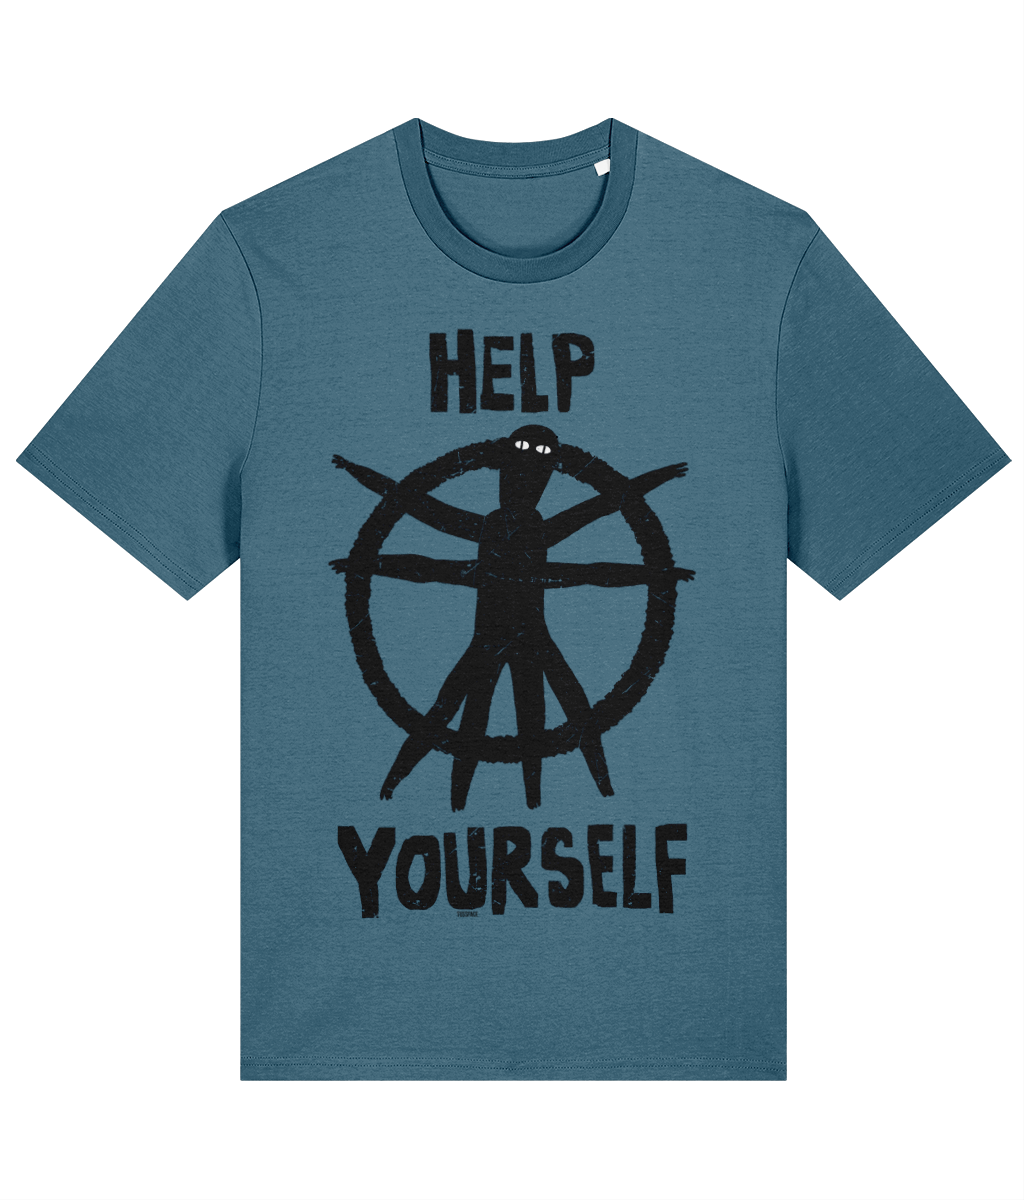 HELP YOURSELF - We Are Bl1p T-shirt by TussFace